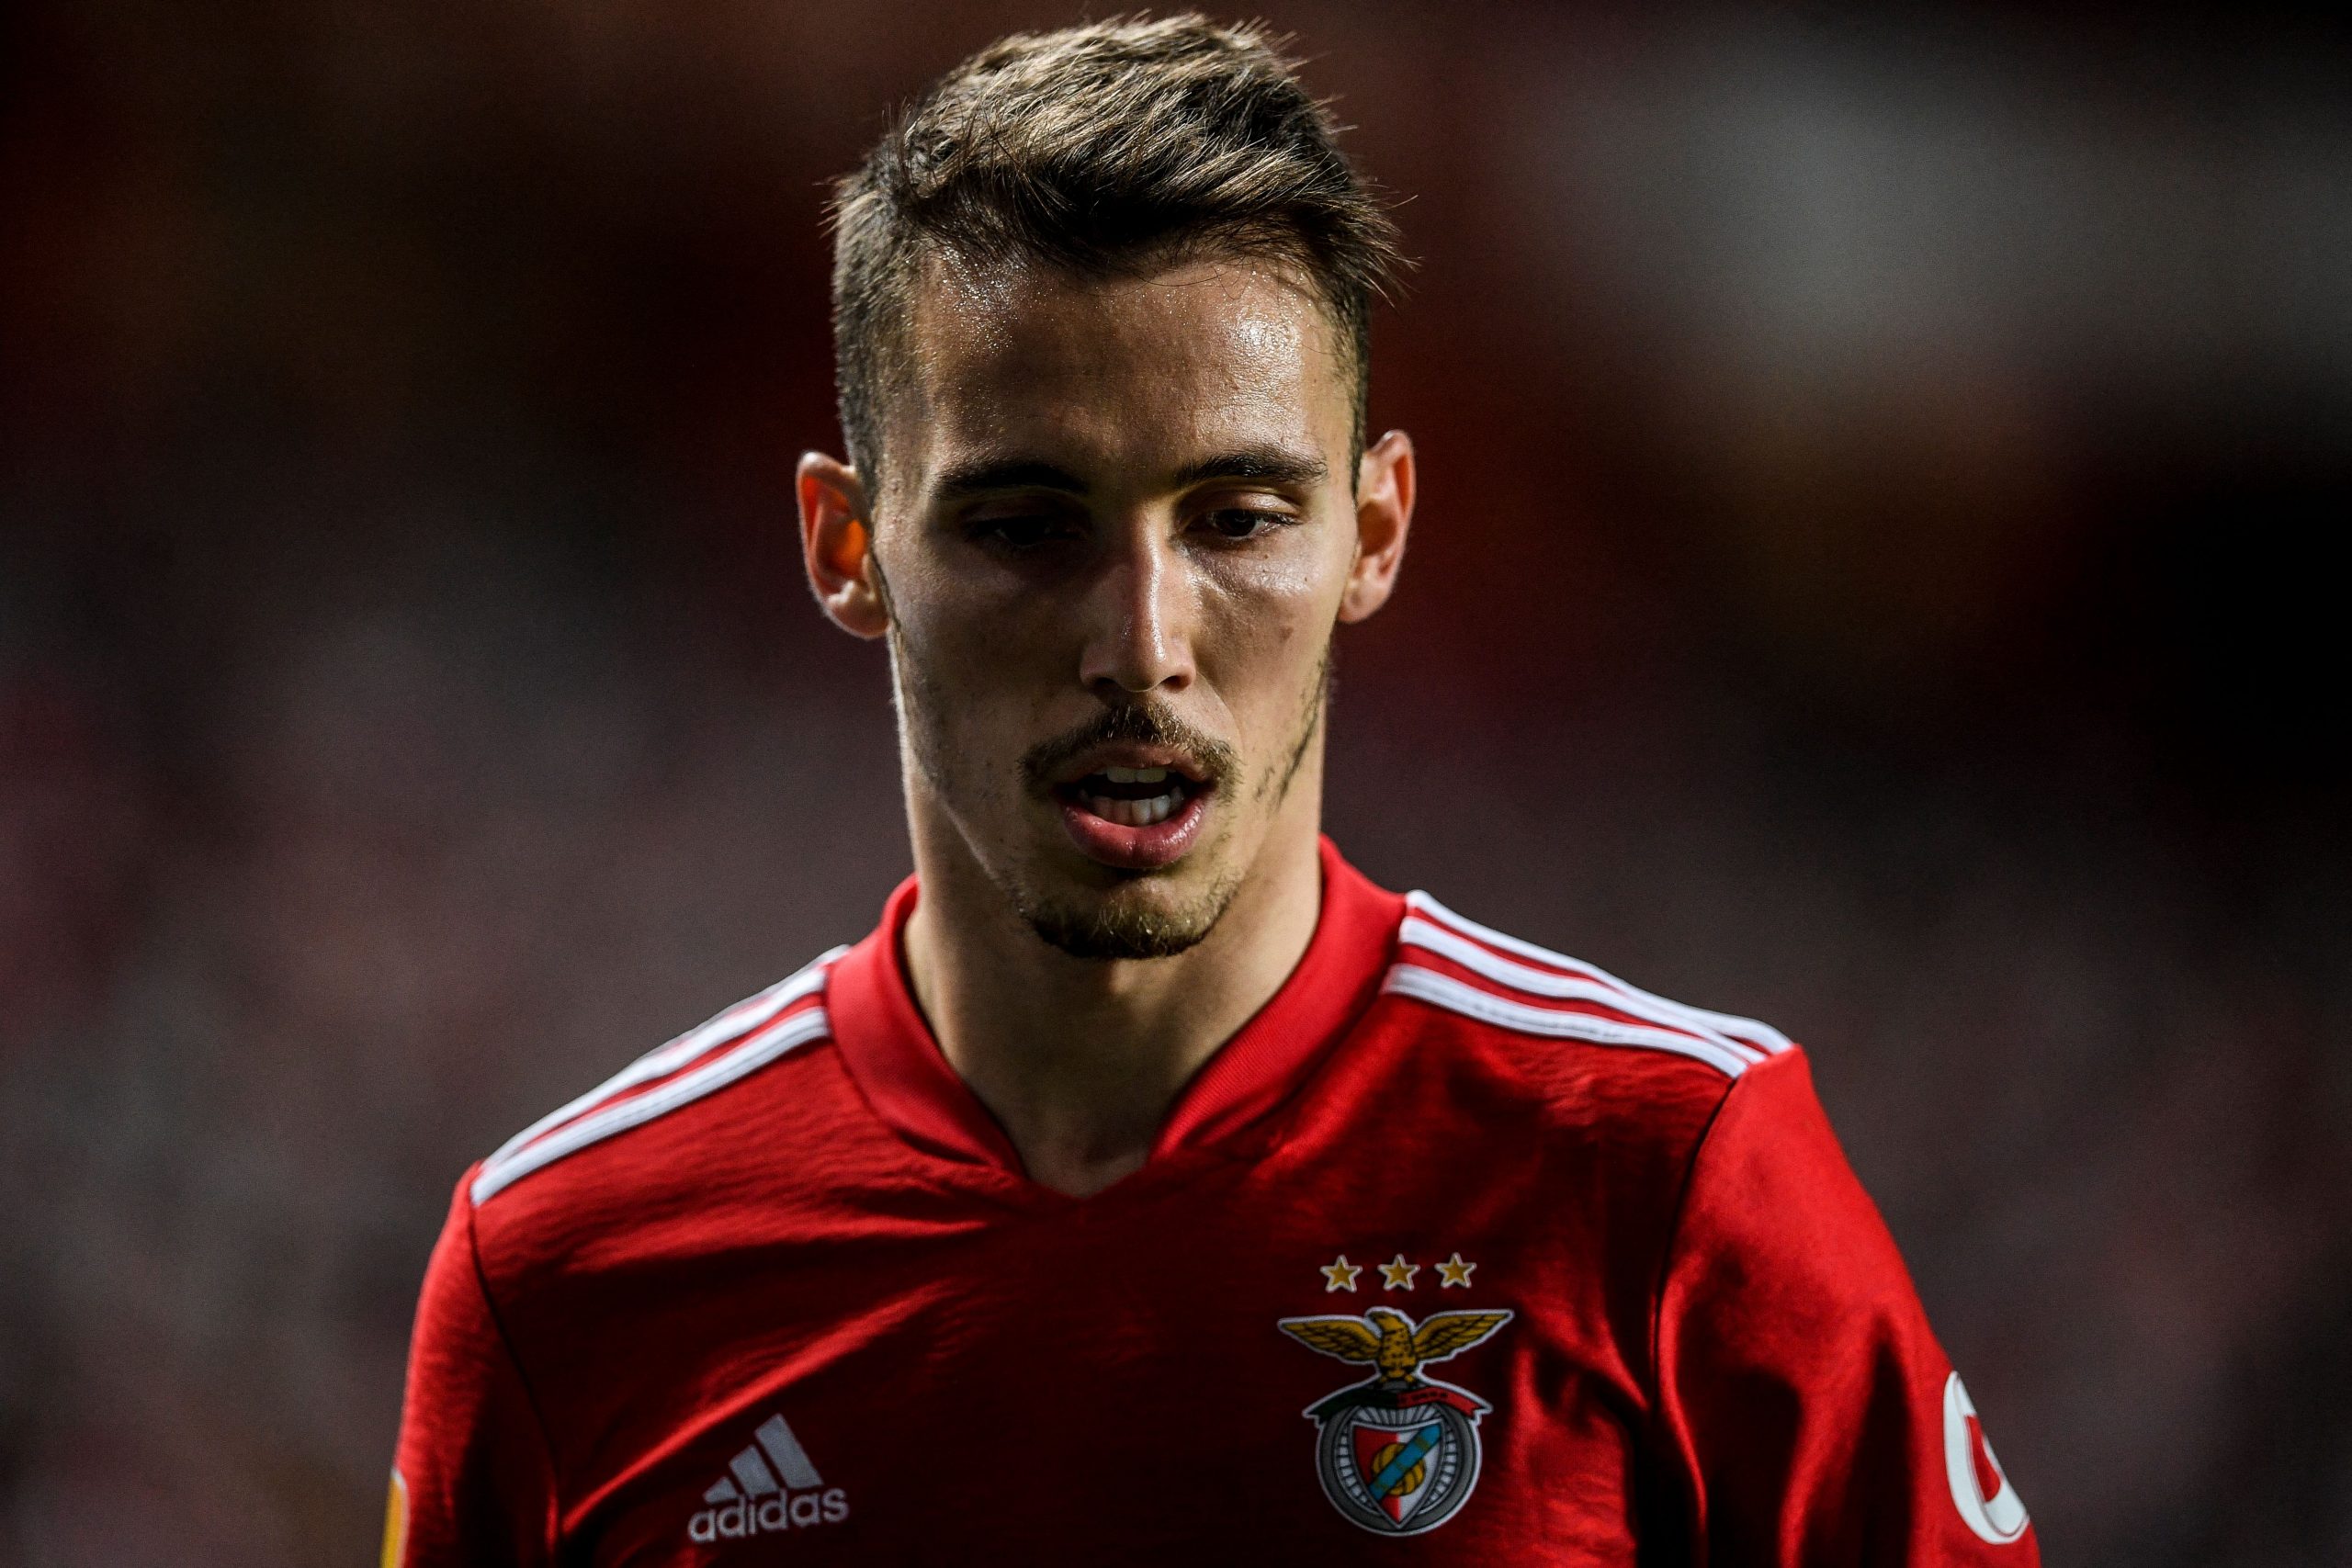 Benfica's Spanish defender Grimaldo Garcia looks on during the Portuguese league football match between SL Benfica and FC Pacos de Ferreira at the Luz stadium in Lisbon on January 9, 2022. (Photo by PATRICIA DE MELO MOREIRA / AFP) (Photo by PATRICIA DE MELO MOREIRA/AFP via Getty Images)The 4th Official uses images provided by the following image agency: Getty Images (https://www.gettyimages.de/) Imago Images (https://www.imago-images.de/)